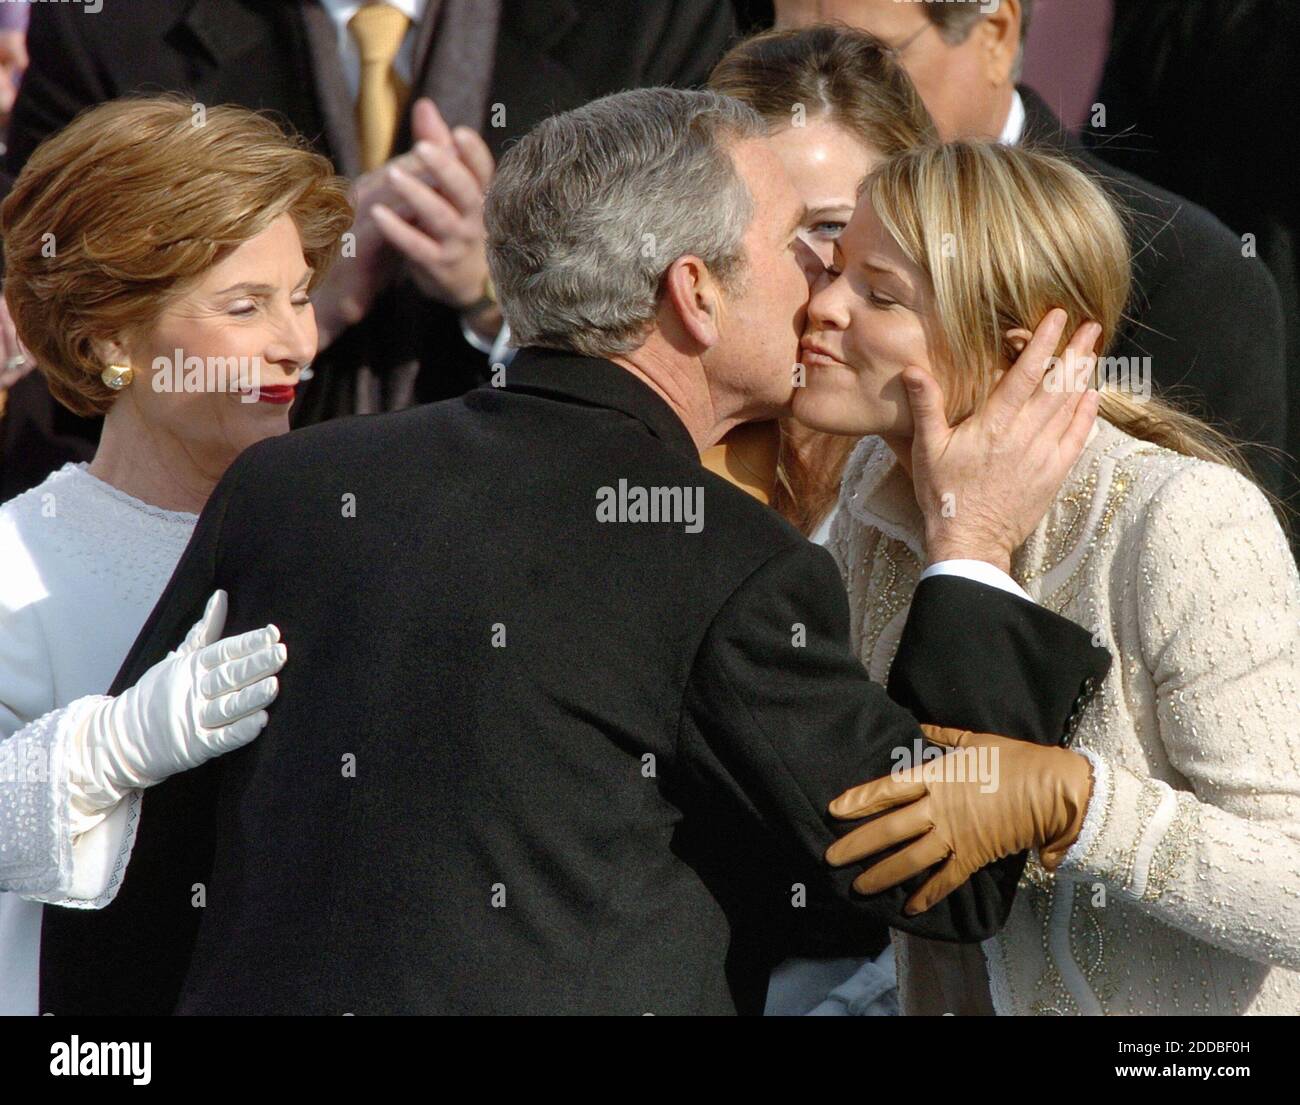 NO FILM, NO VIDEO, NO TV, NO DOCUMENTARY - President George W. Bush kisses daughter Jenna, right, as First Lady Laura Bush, left, looks on, after being sworn in as U.S. Preident for a second term. Washington, DC, USA, on January 20, 2005. Photo by George Bridges/US News Story Slugged/KRT/ABACA. Stock Photo